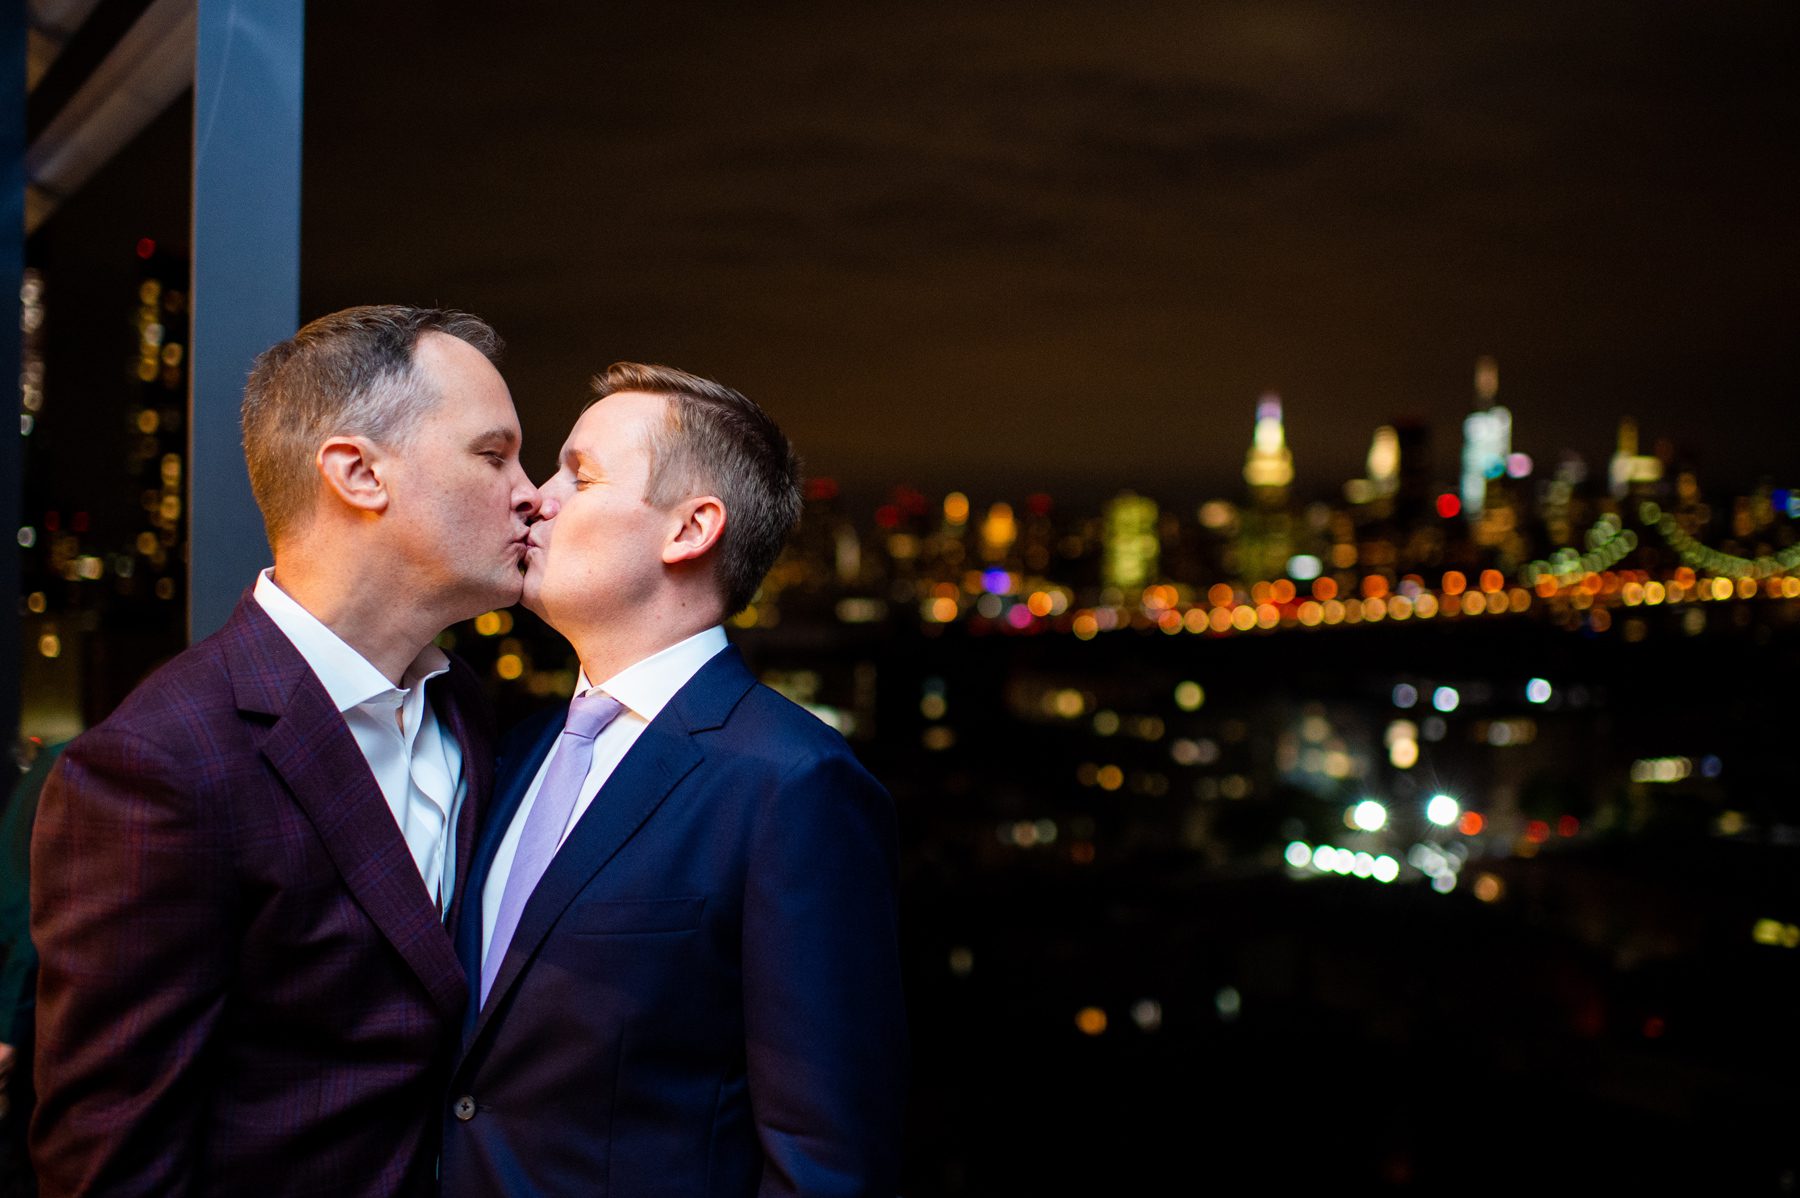 Grooms Kissing with NYC Skyline